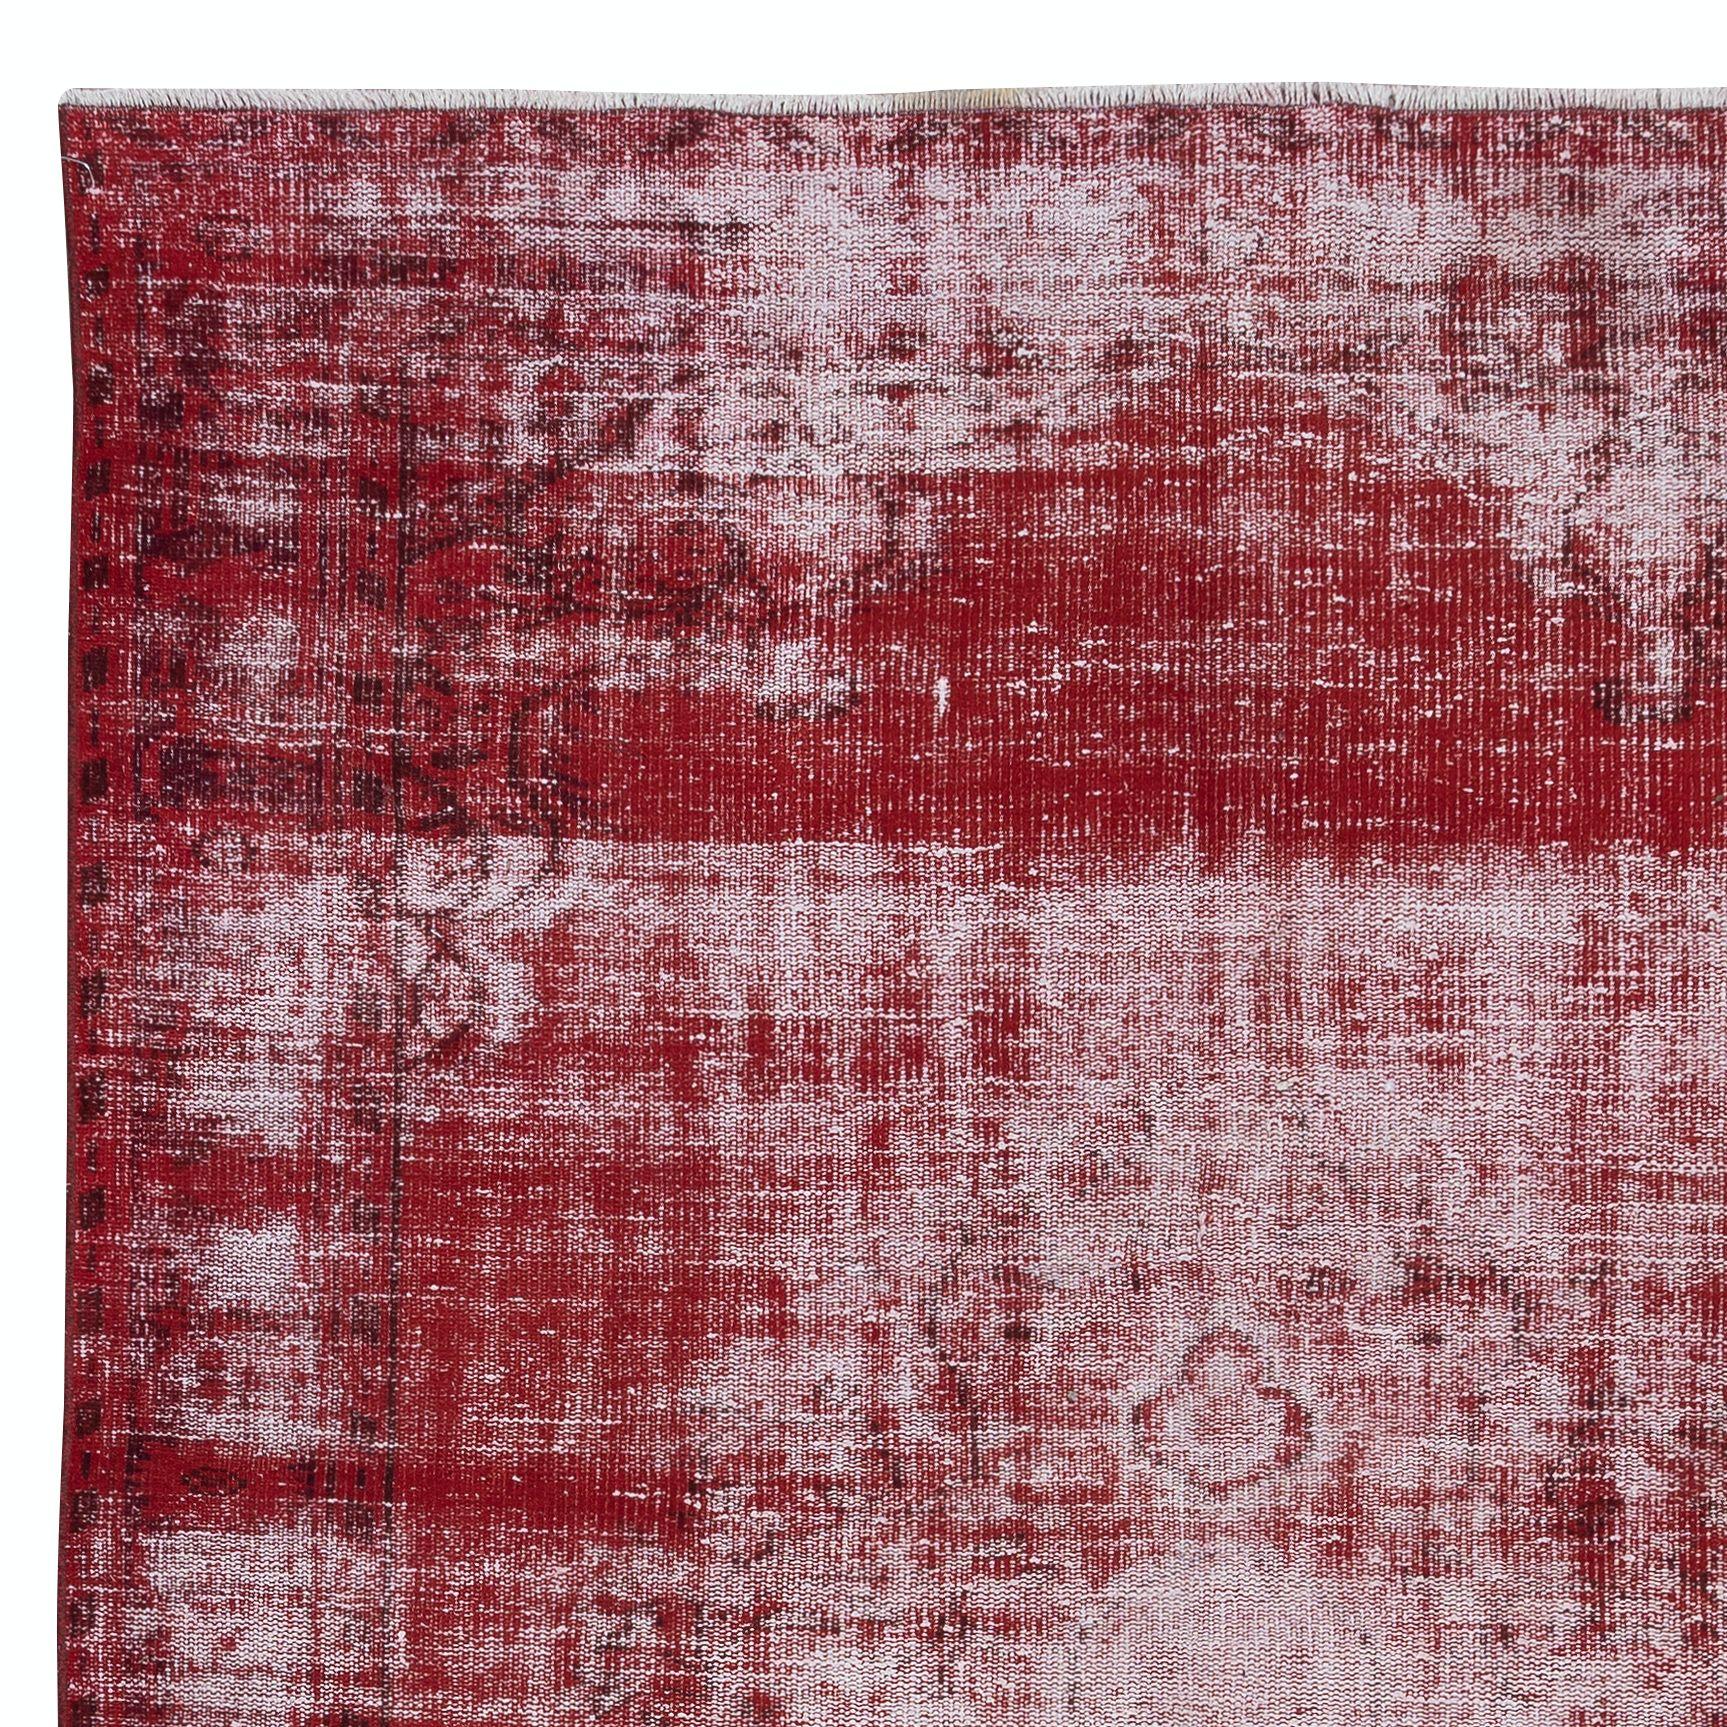 Hand-Woven 6x10 Ft Shabby Chic Turkish Red Area Rug, Vintage Handmade Distressed Carpet For Sale